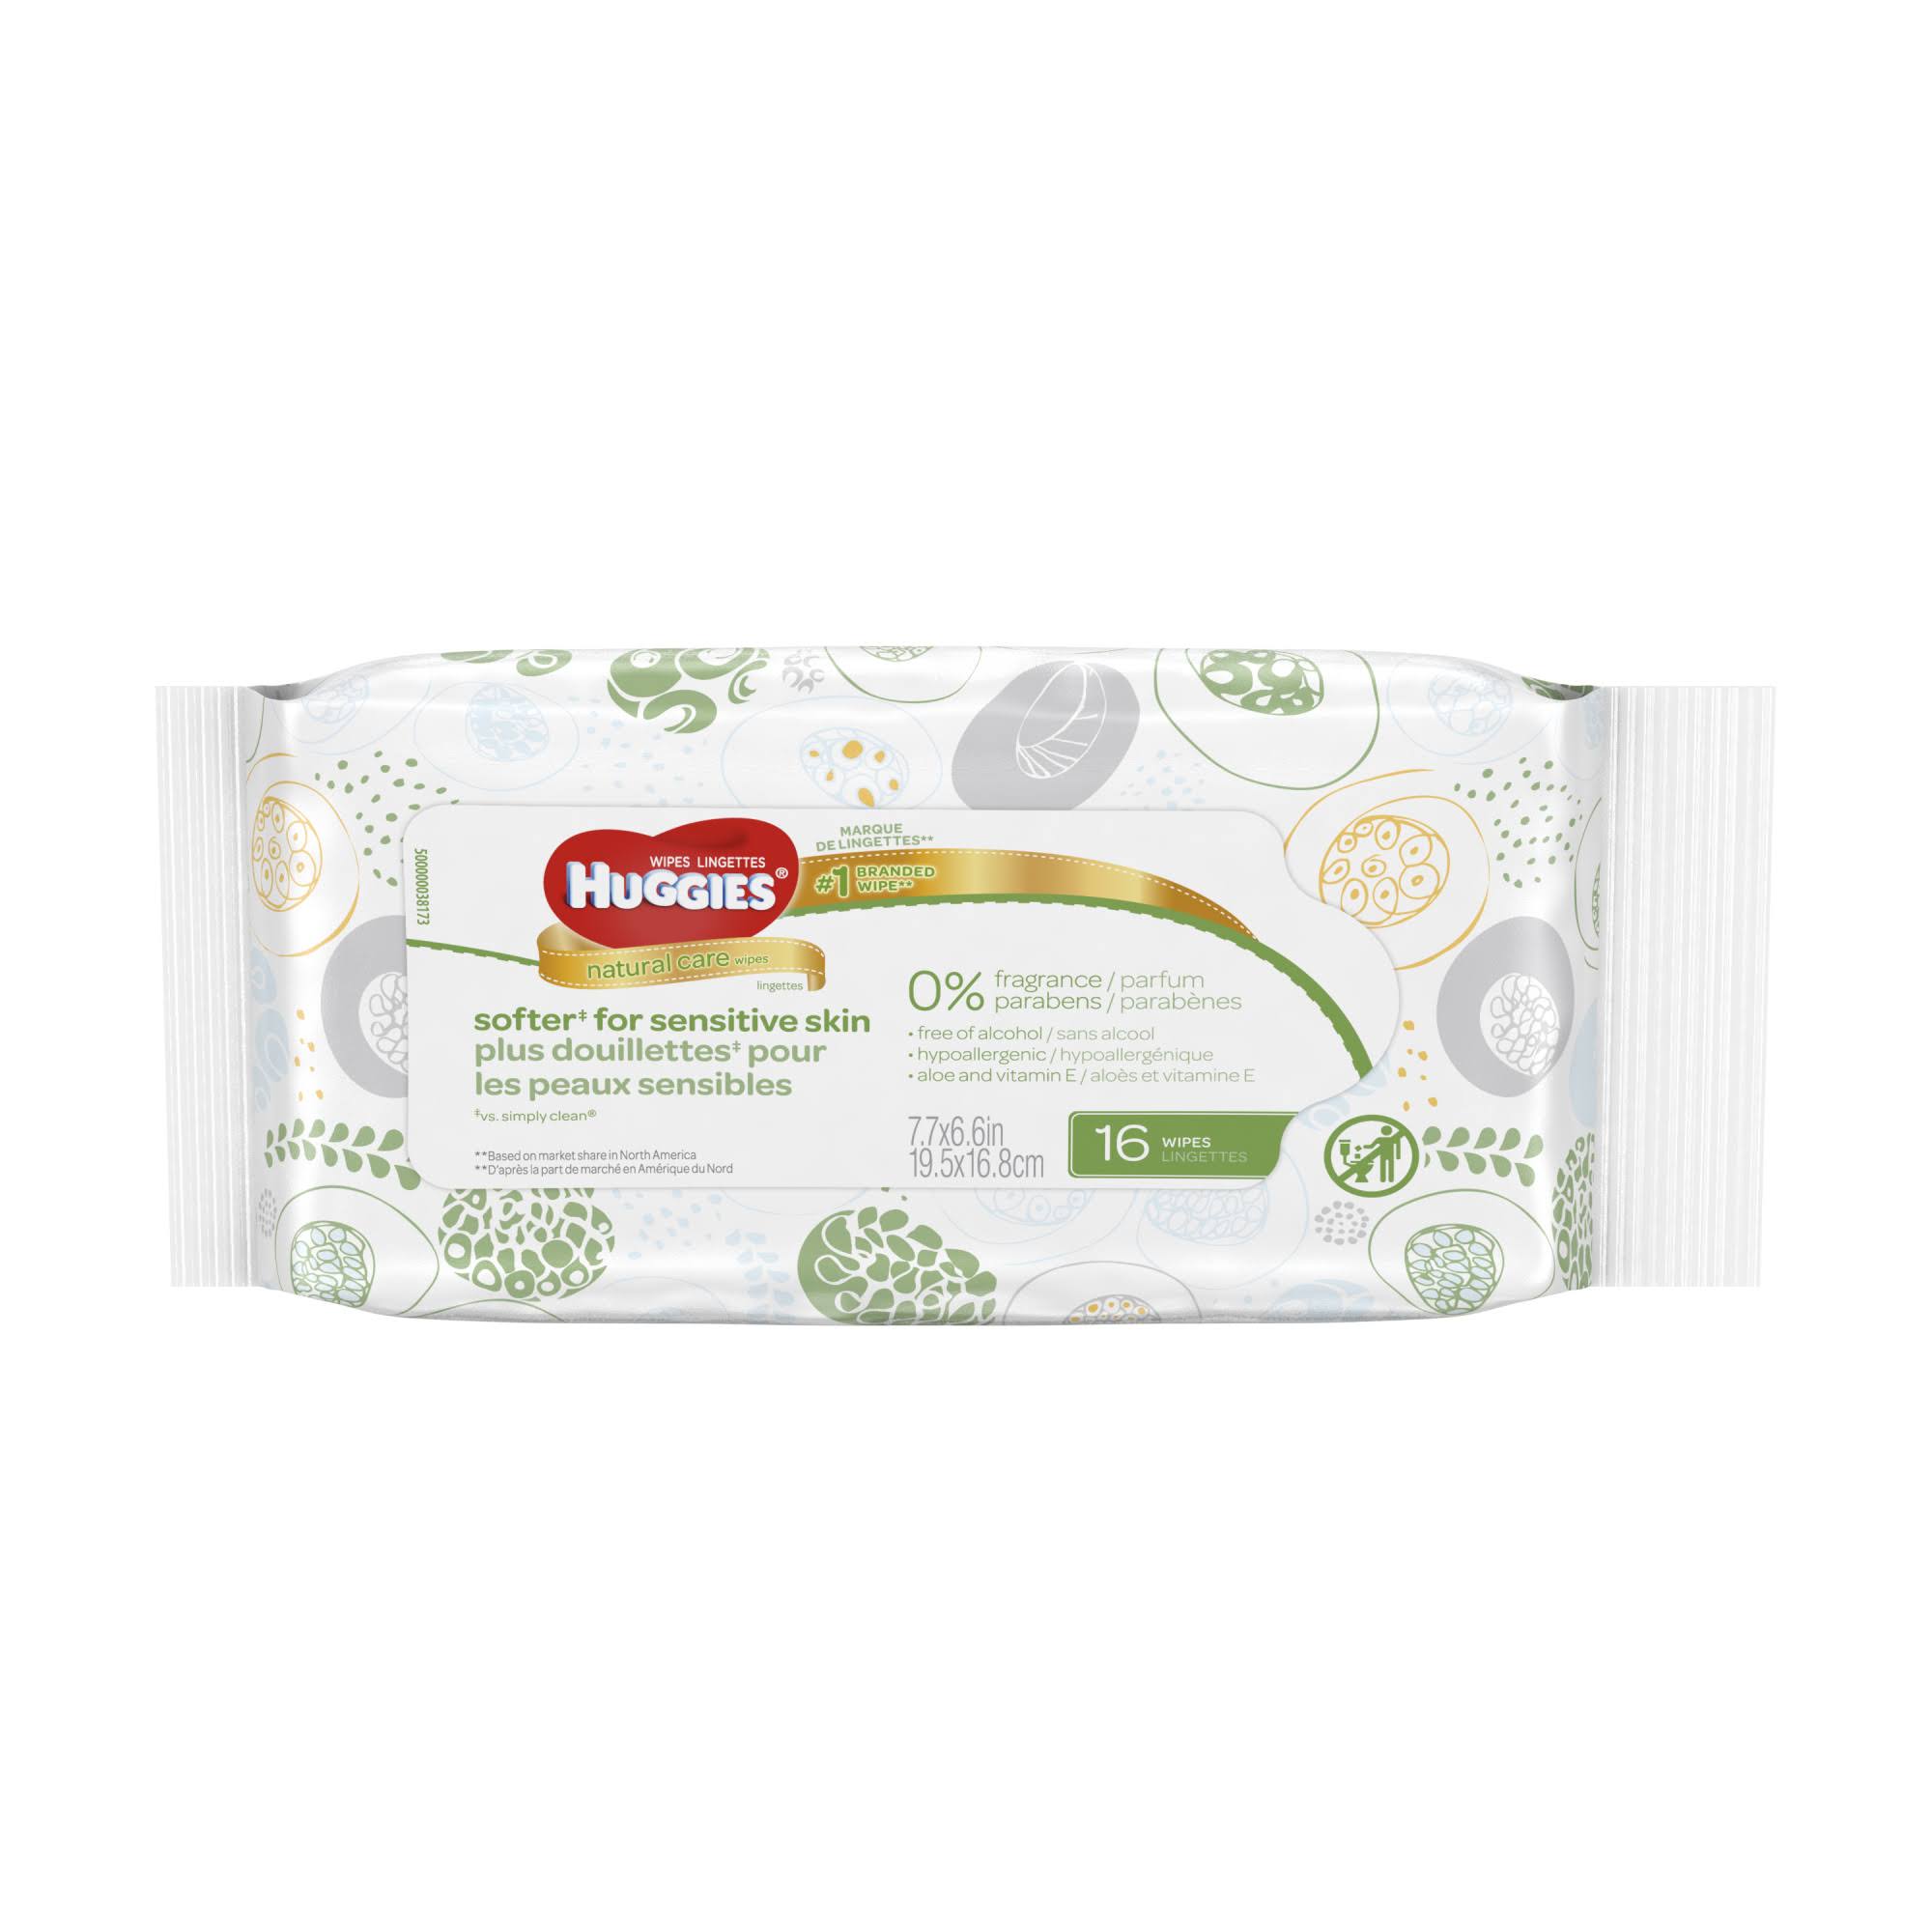 Huggies Natural Care Baby Wipes - Unscented, 16 Sheets